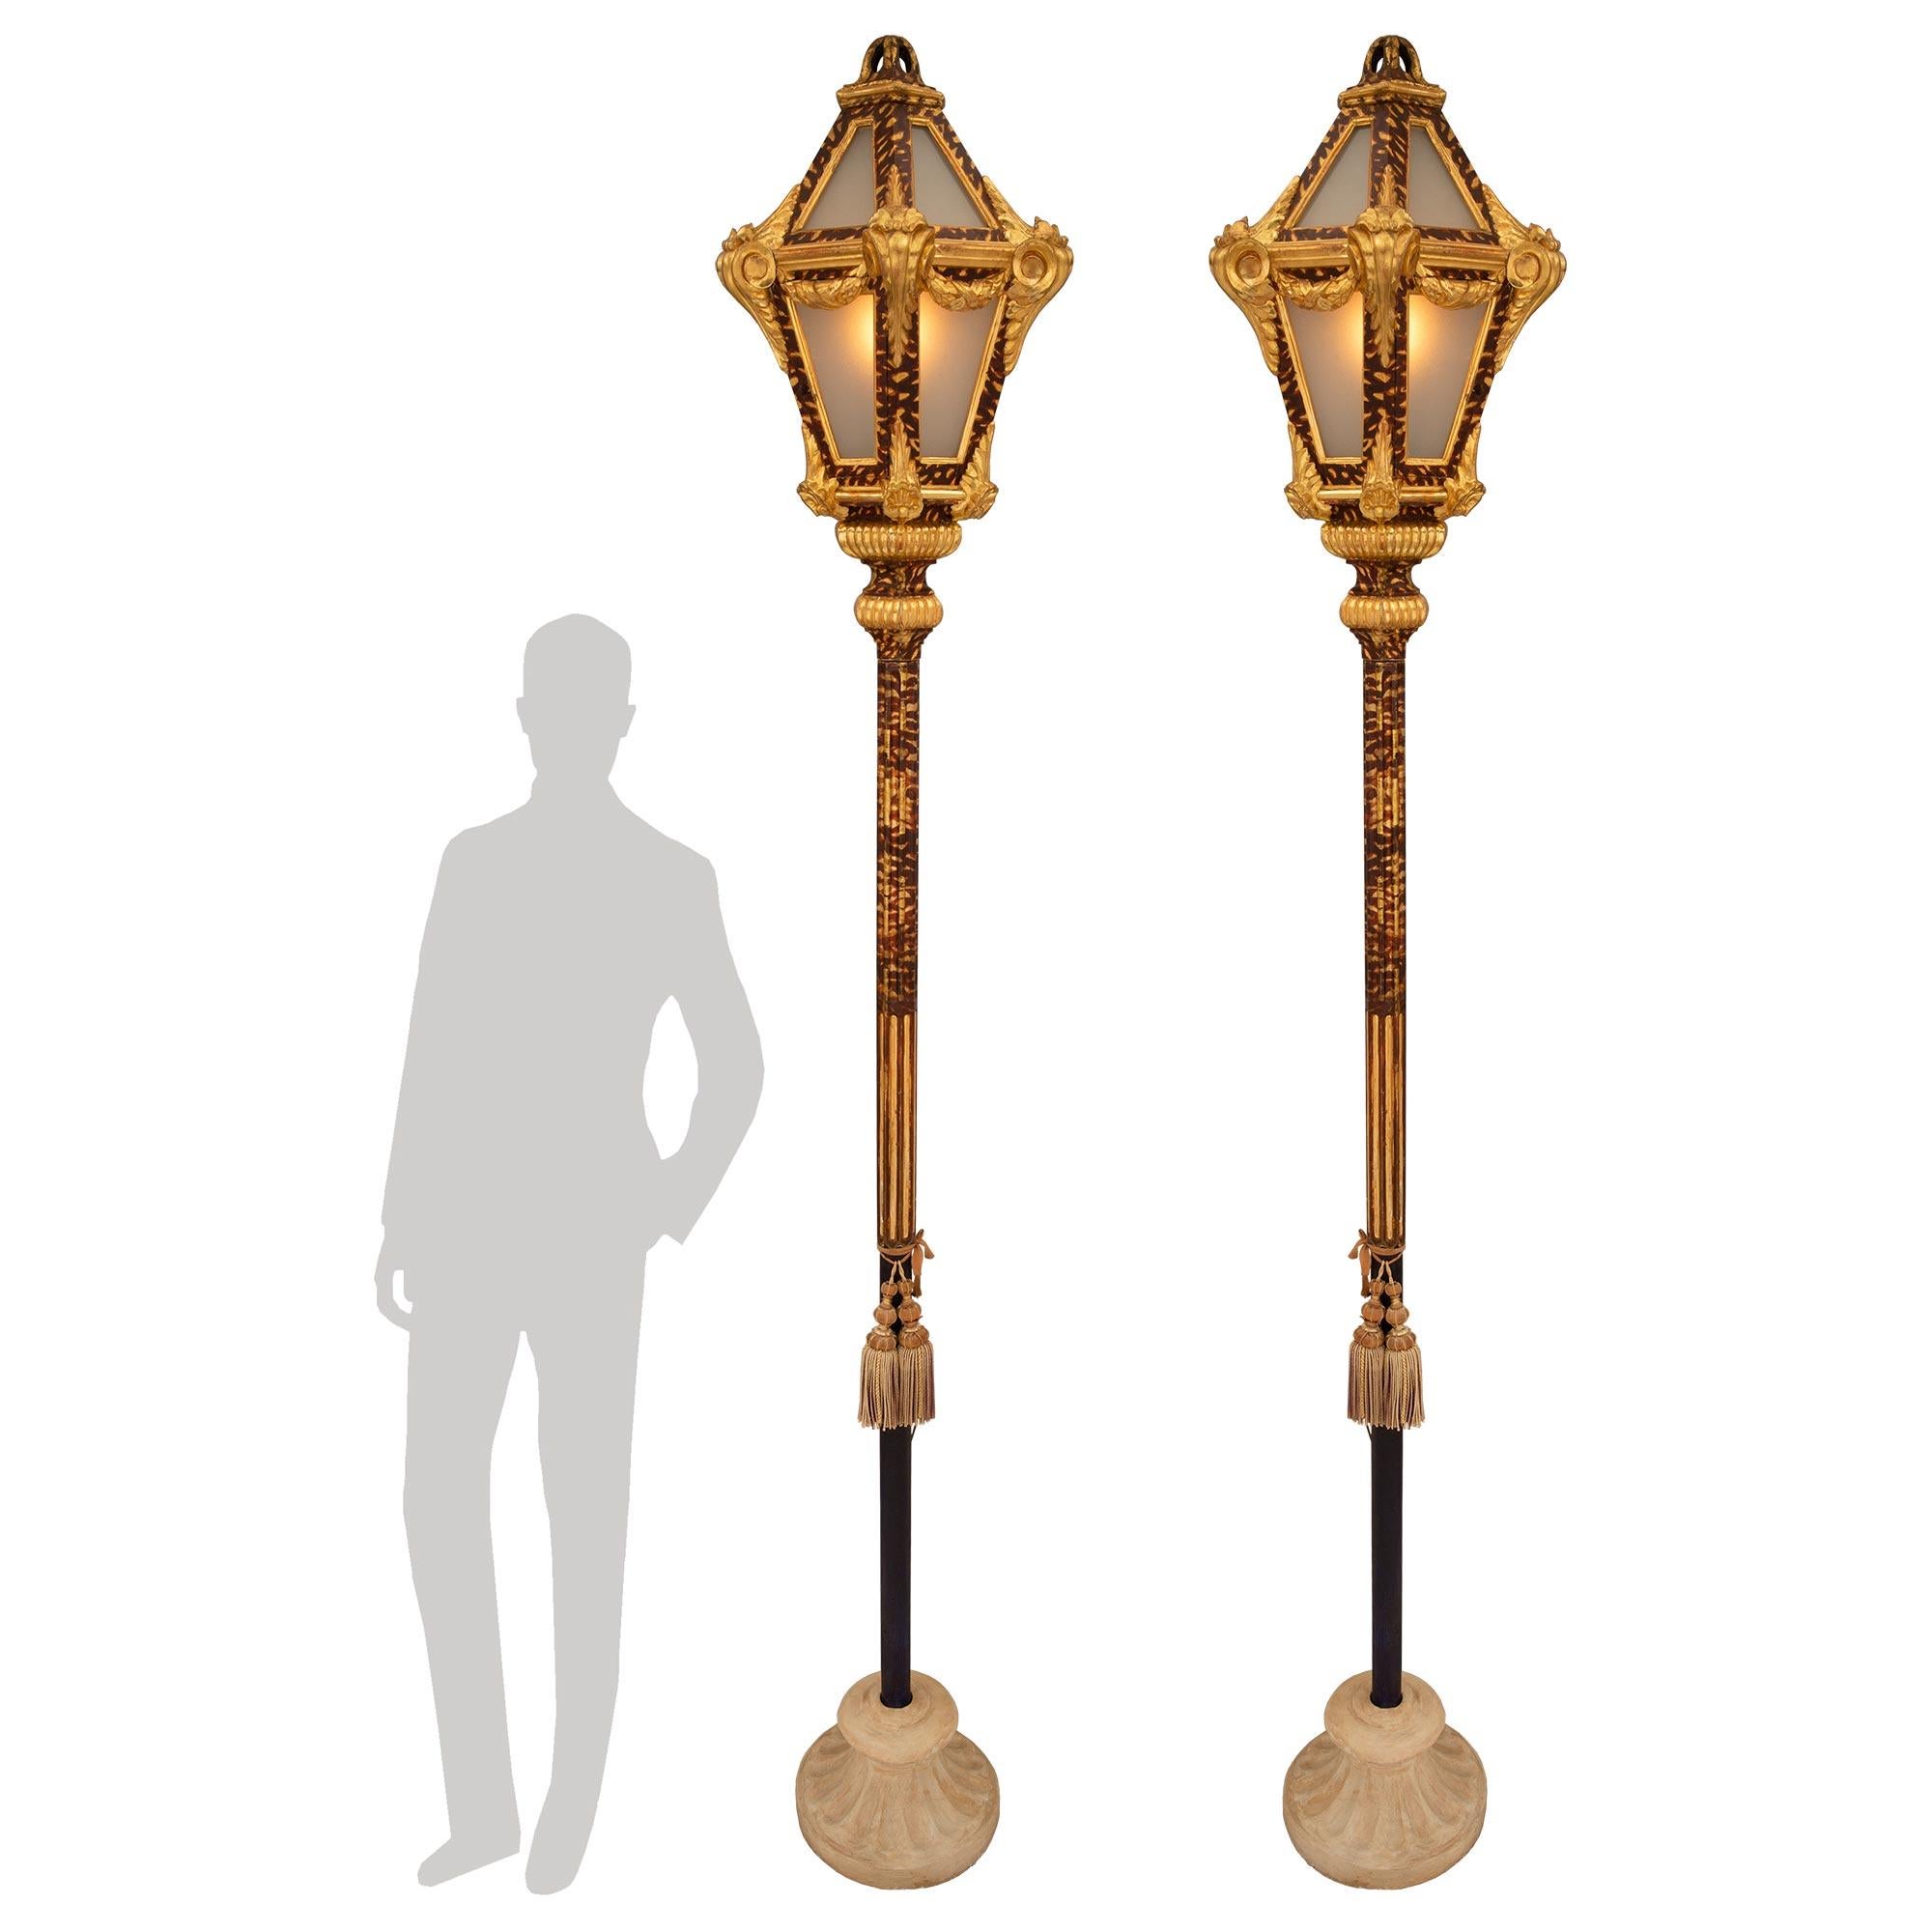 A most elegant pair of Italian 18th century Venetian st. patinated wood, faux tortoise shell and giltwood floor lamps. Each tall floor lamp is raised by a fine circular composite stone base with a lovely fluted design. The central wooden supports